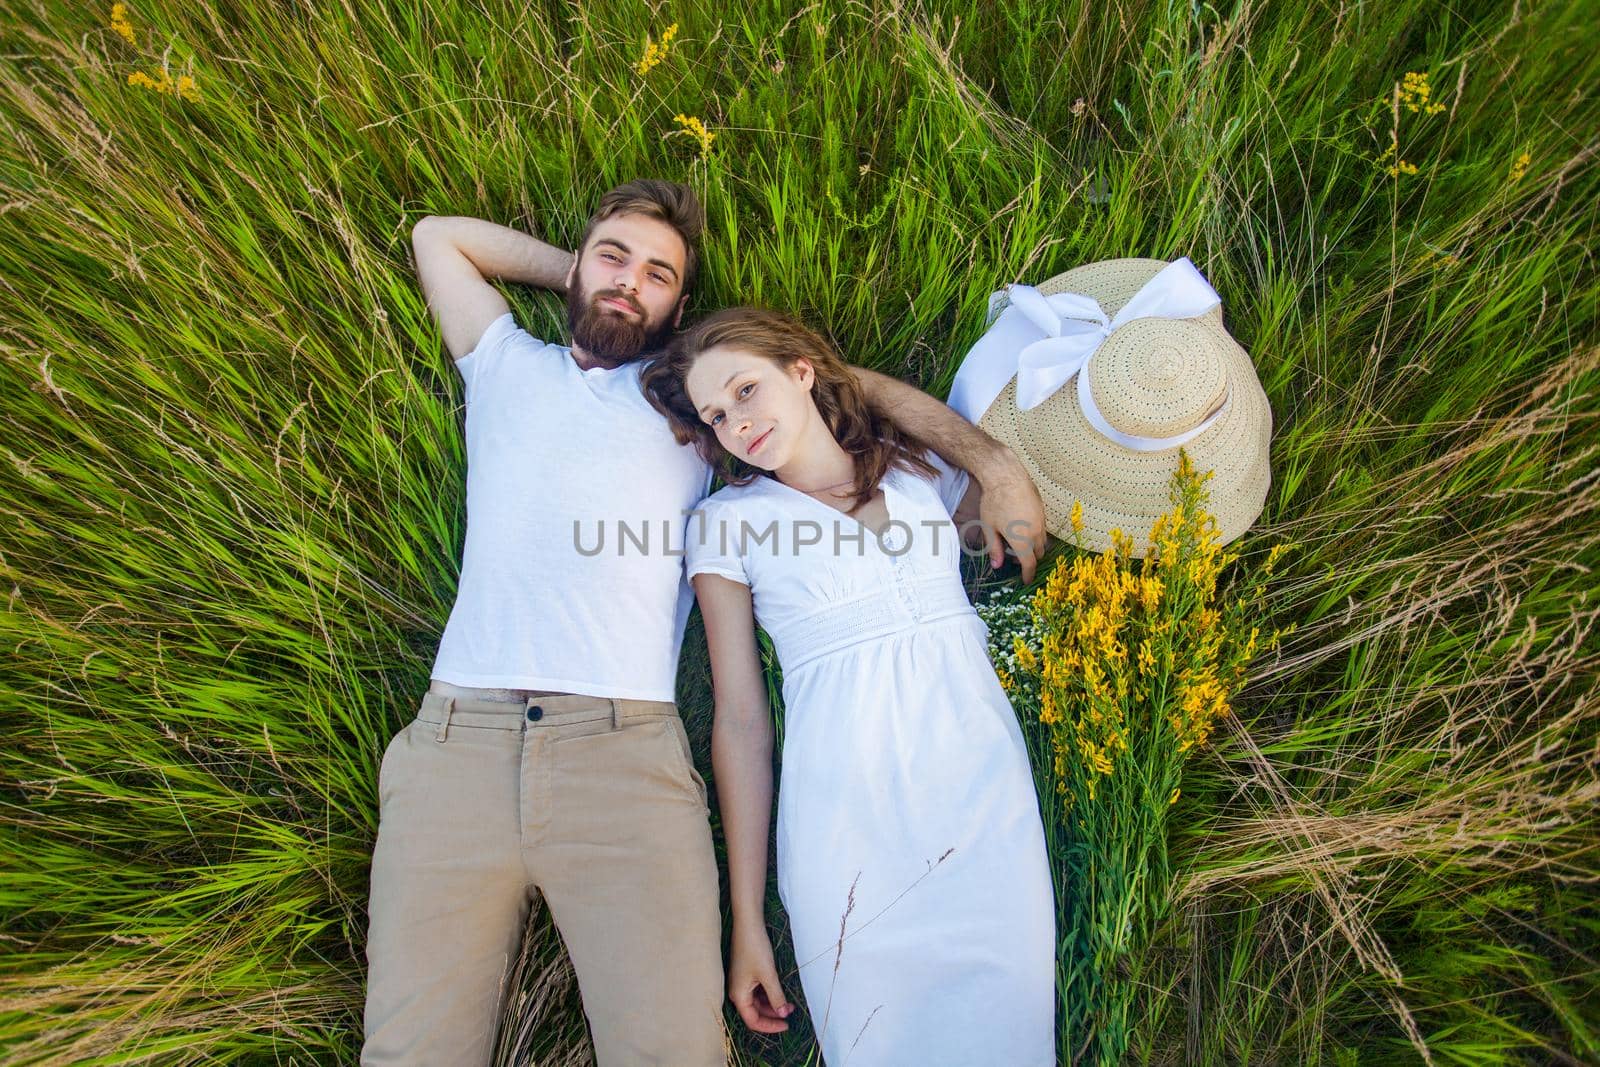 Happy young relaxed couple in love laying down on the grass overhead. outdoor summertime.